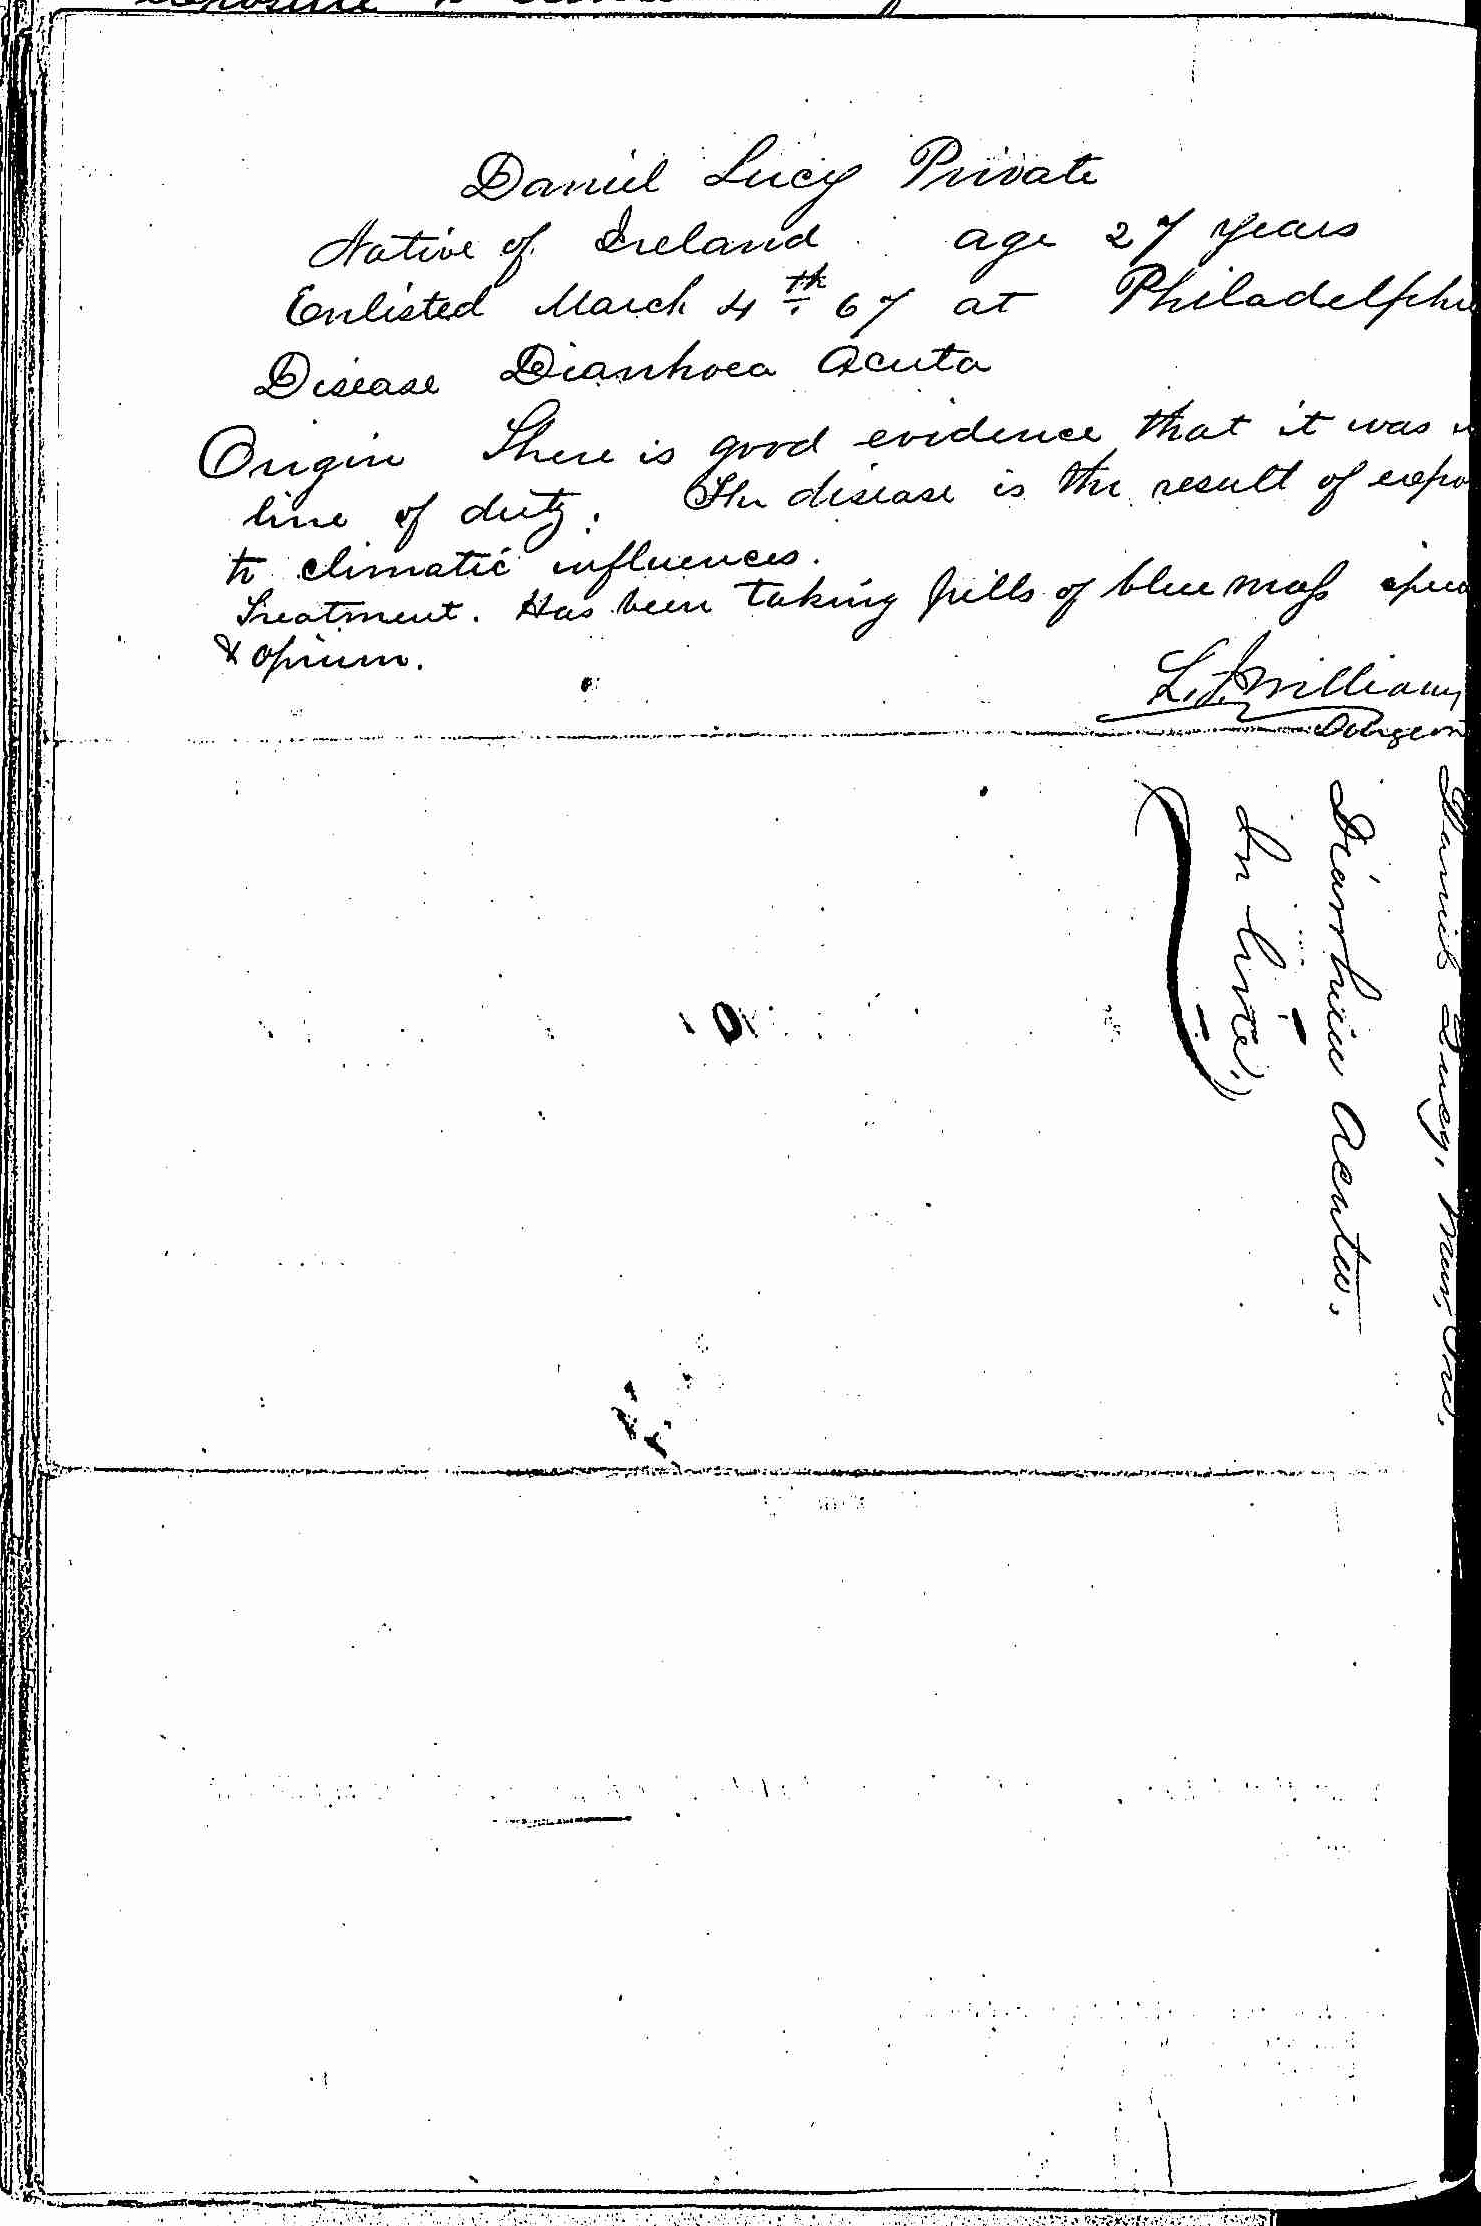 Entry for Daniel Lucy (page 2 of 2) in the log Hospital Tickets and Case Papers - Naval Hospital - Washington, D.C. - 1866-68